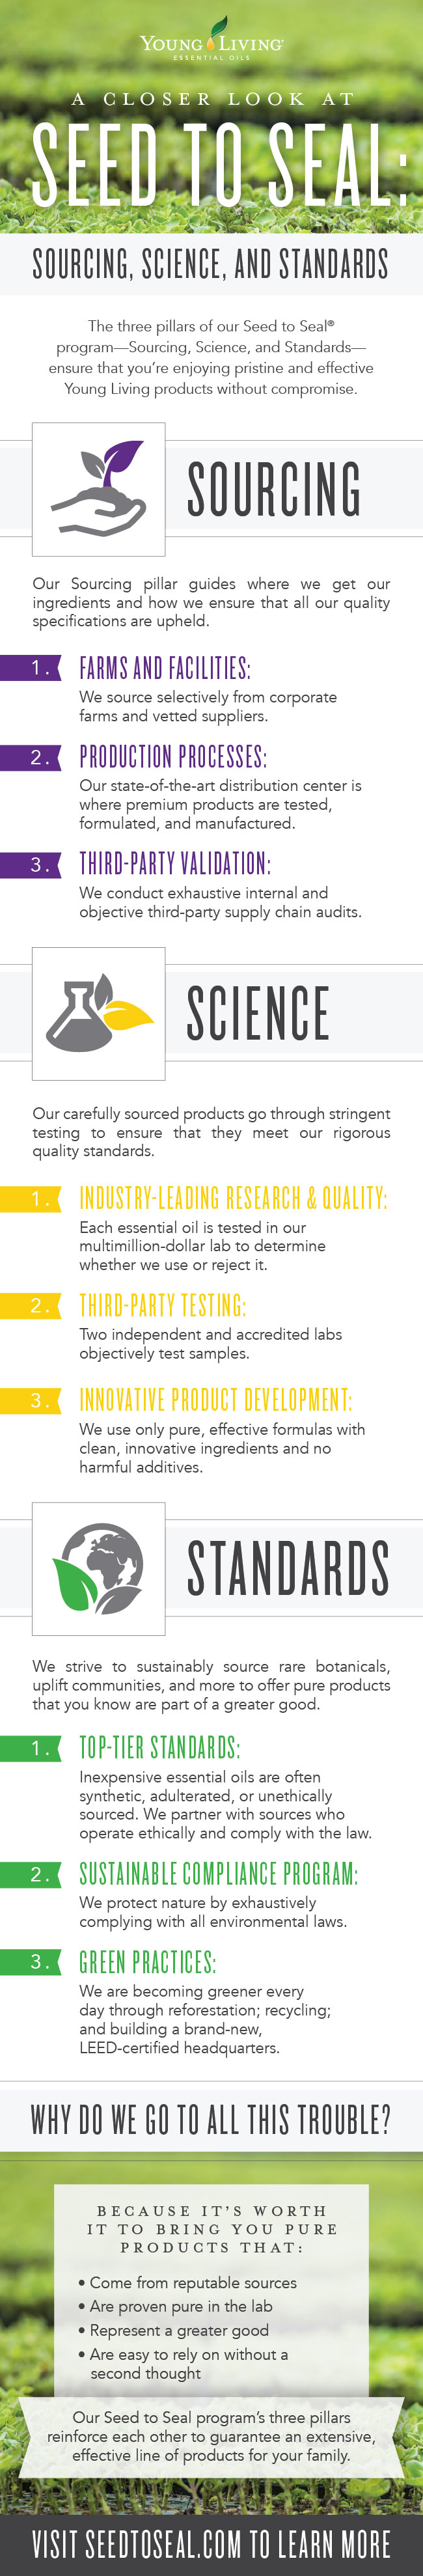 A closer look at Seed to Seal: Sourcing, Science, and Standards Infographic